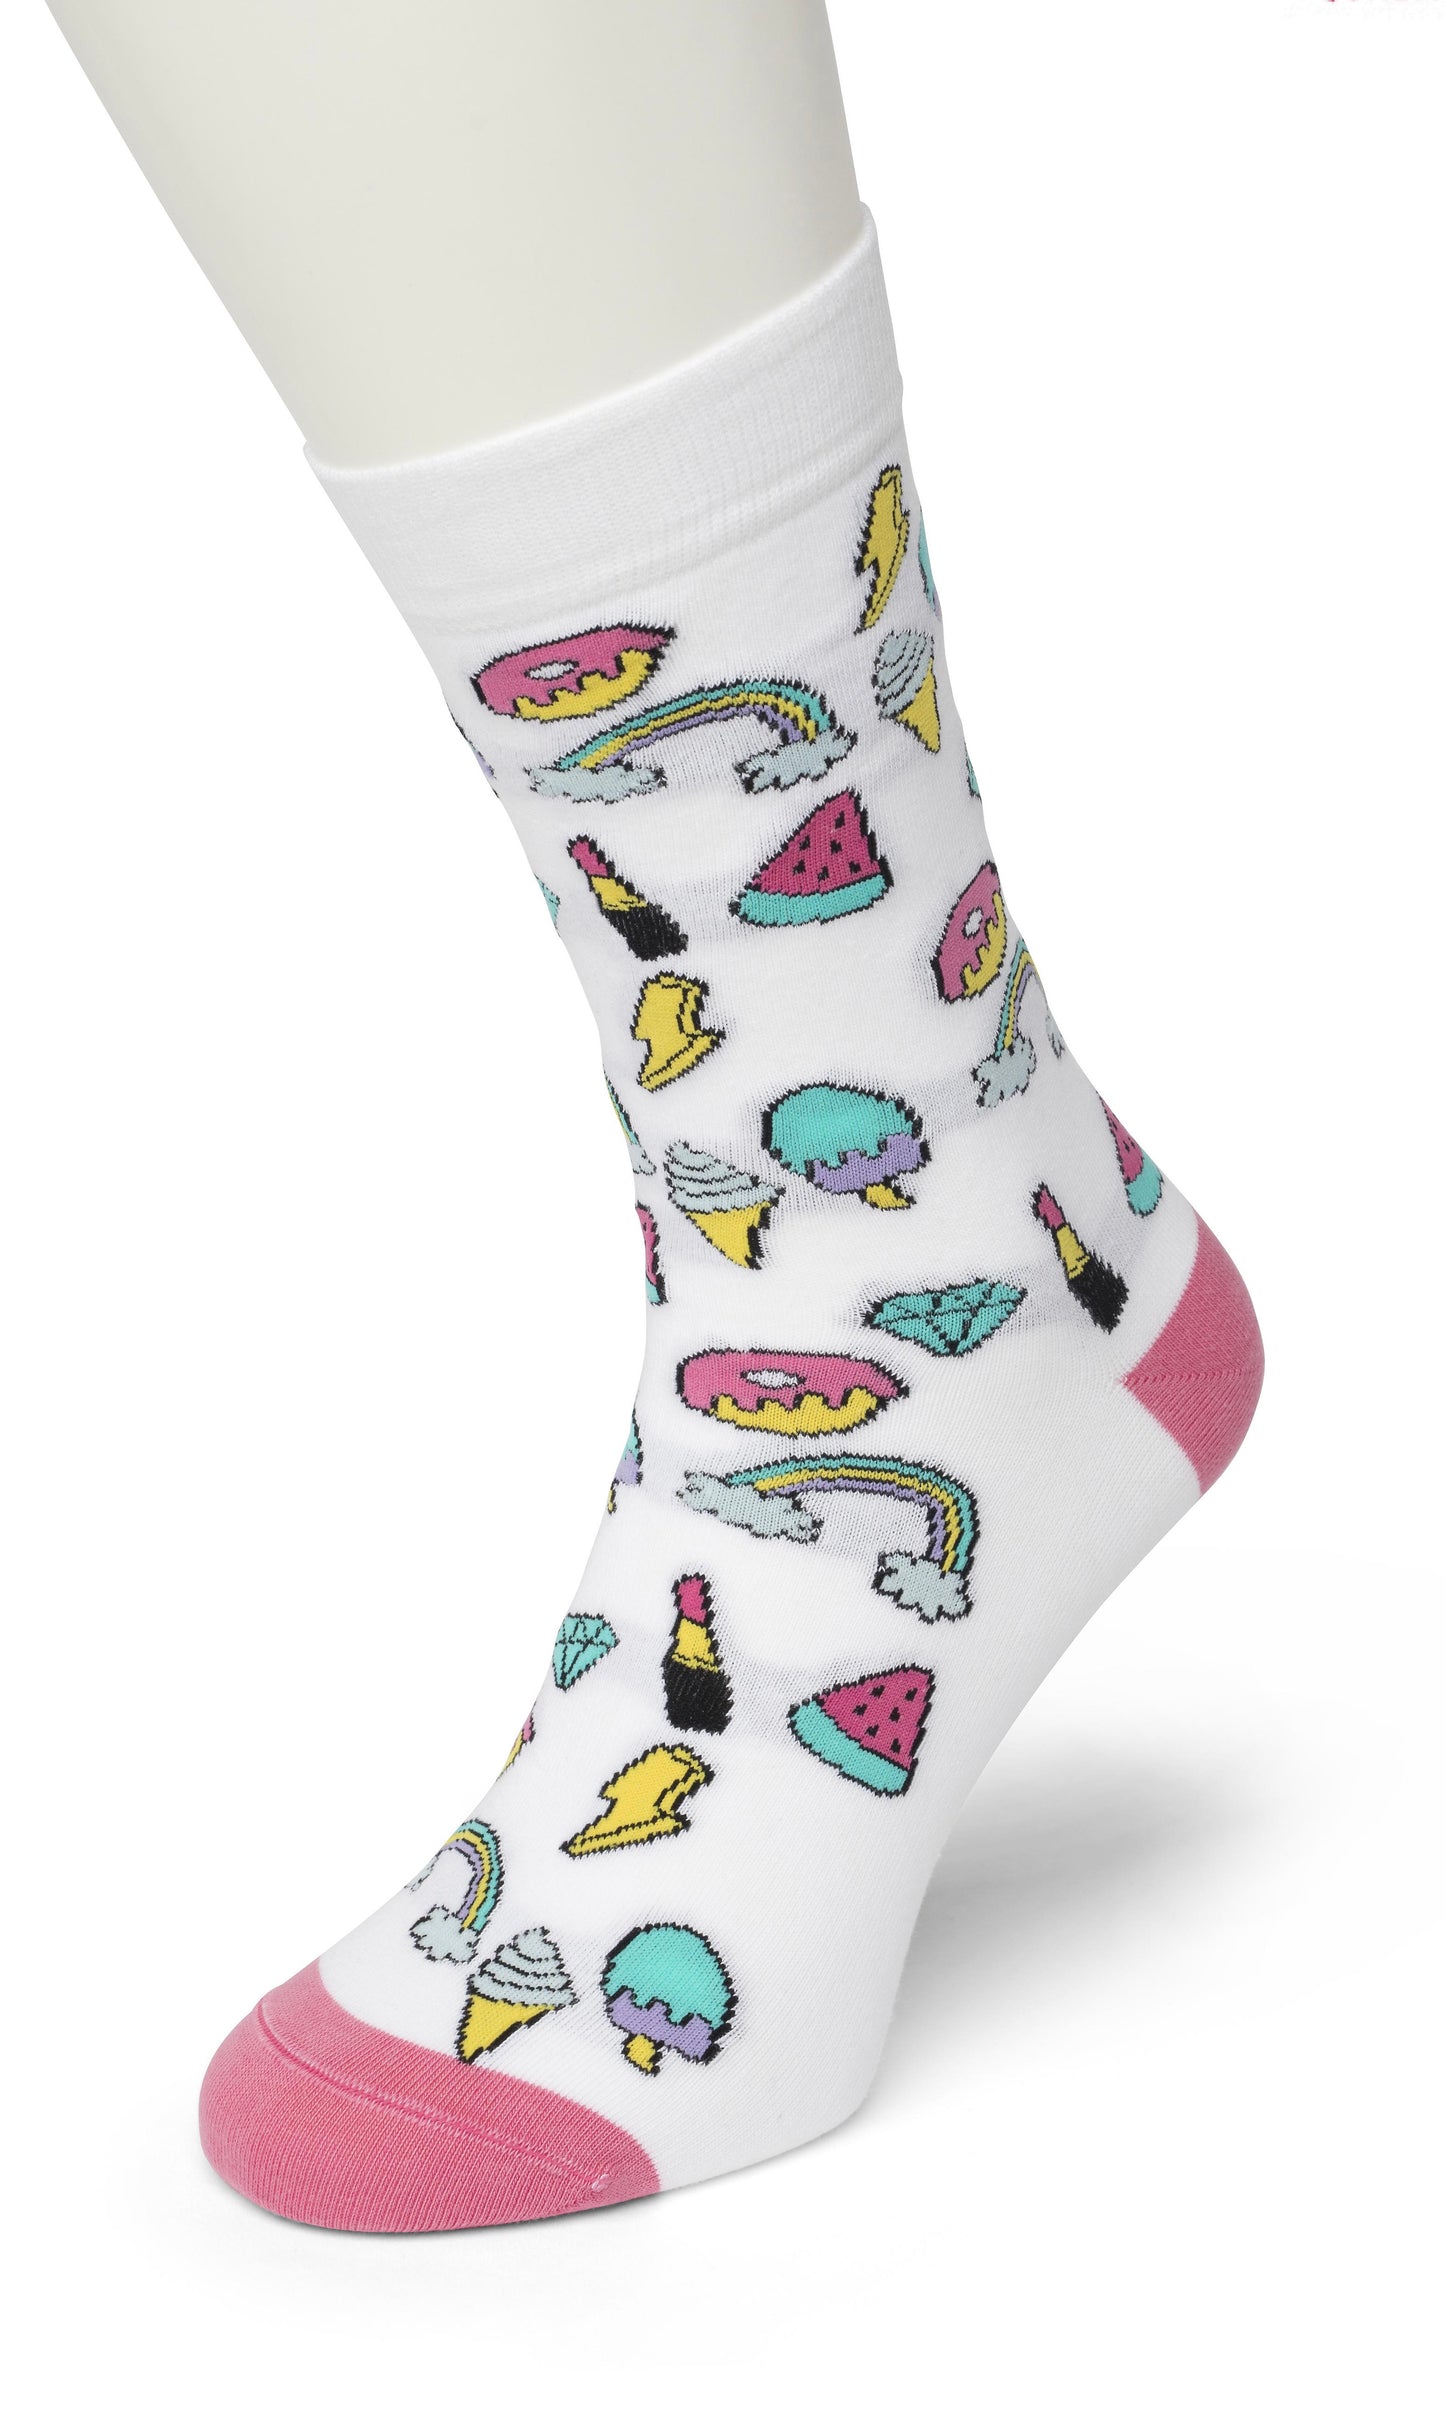 Bonnie Doon Donut Sock - White cotton mix colourful fun patterned socks featuring donuts, ice-cream, rainbows, lightning bolts, watermelon, diamonds and lipstick.